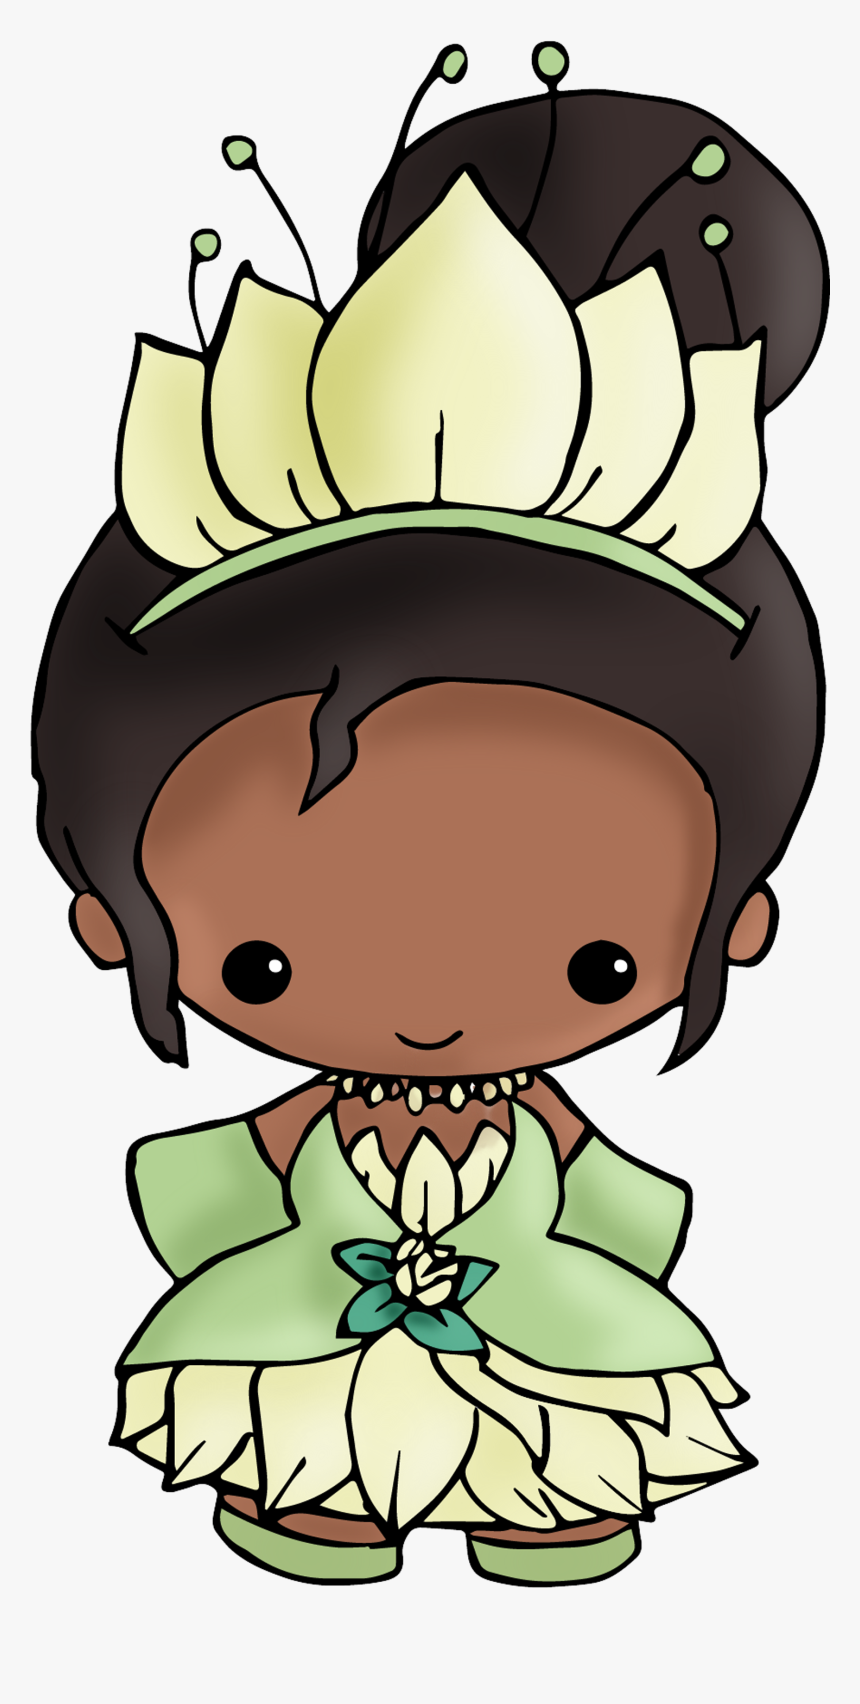 Tiana Available On Shirts And Stickers Here - Draw Chibi Princess Tiana, HD Png Download, Free Download